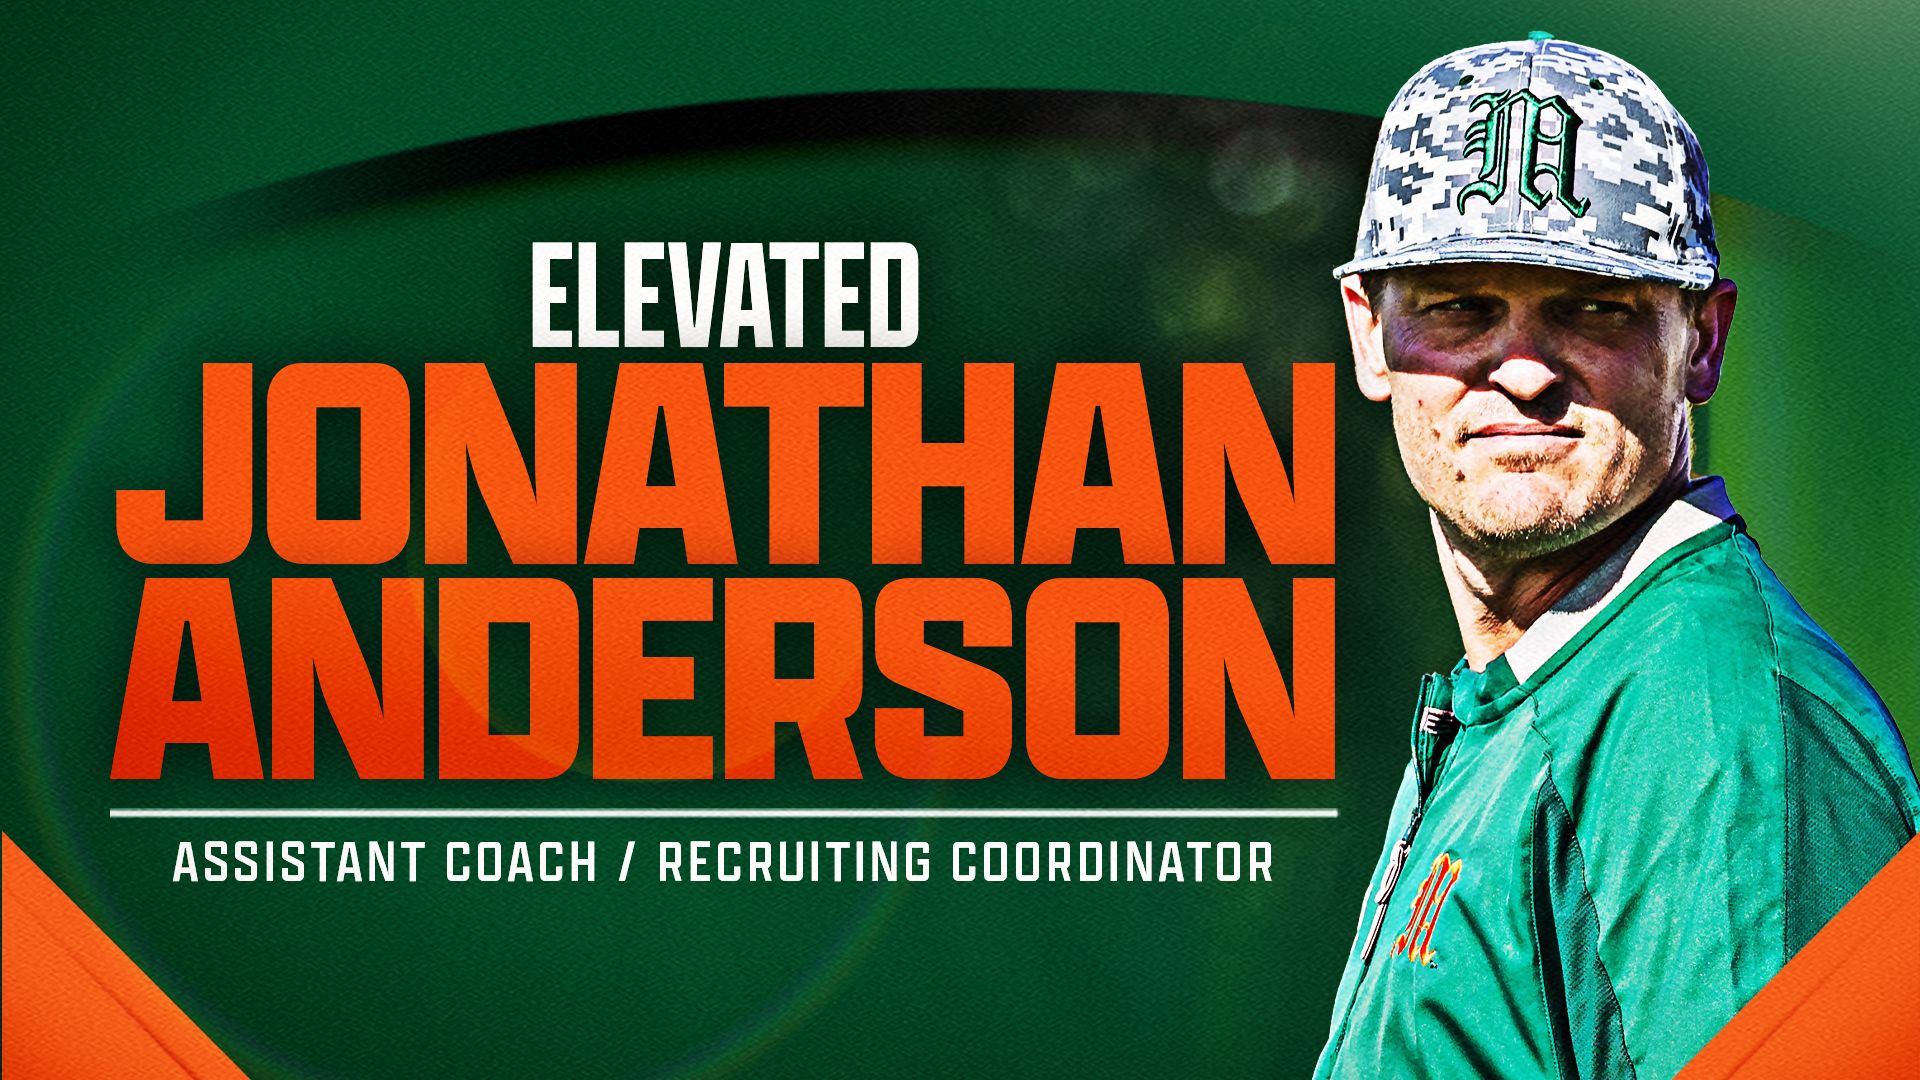 Anderson Elevated to Assistant Coach, Recruiting Coordinator